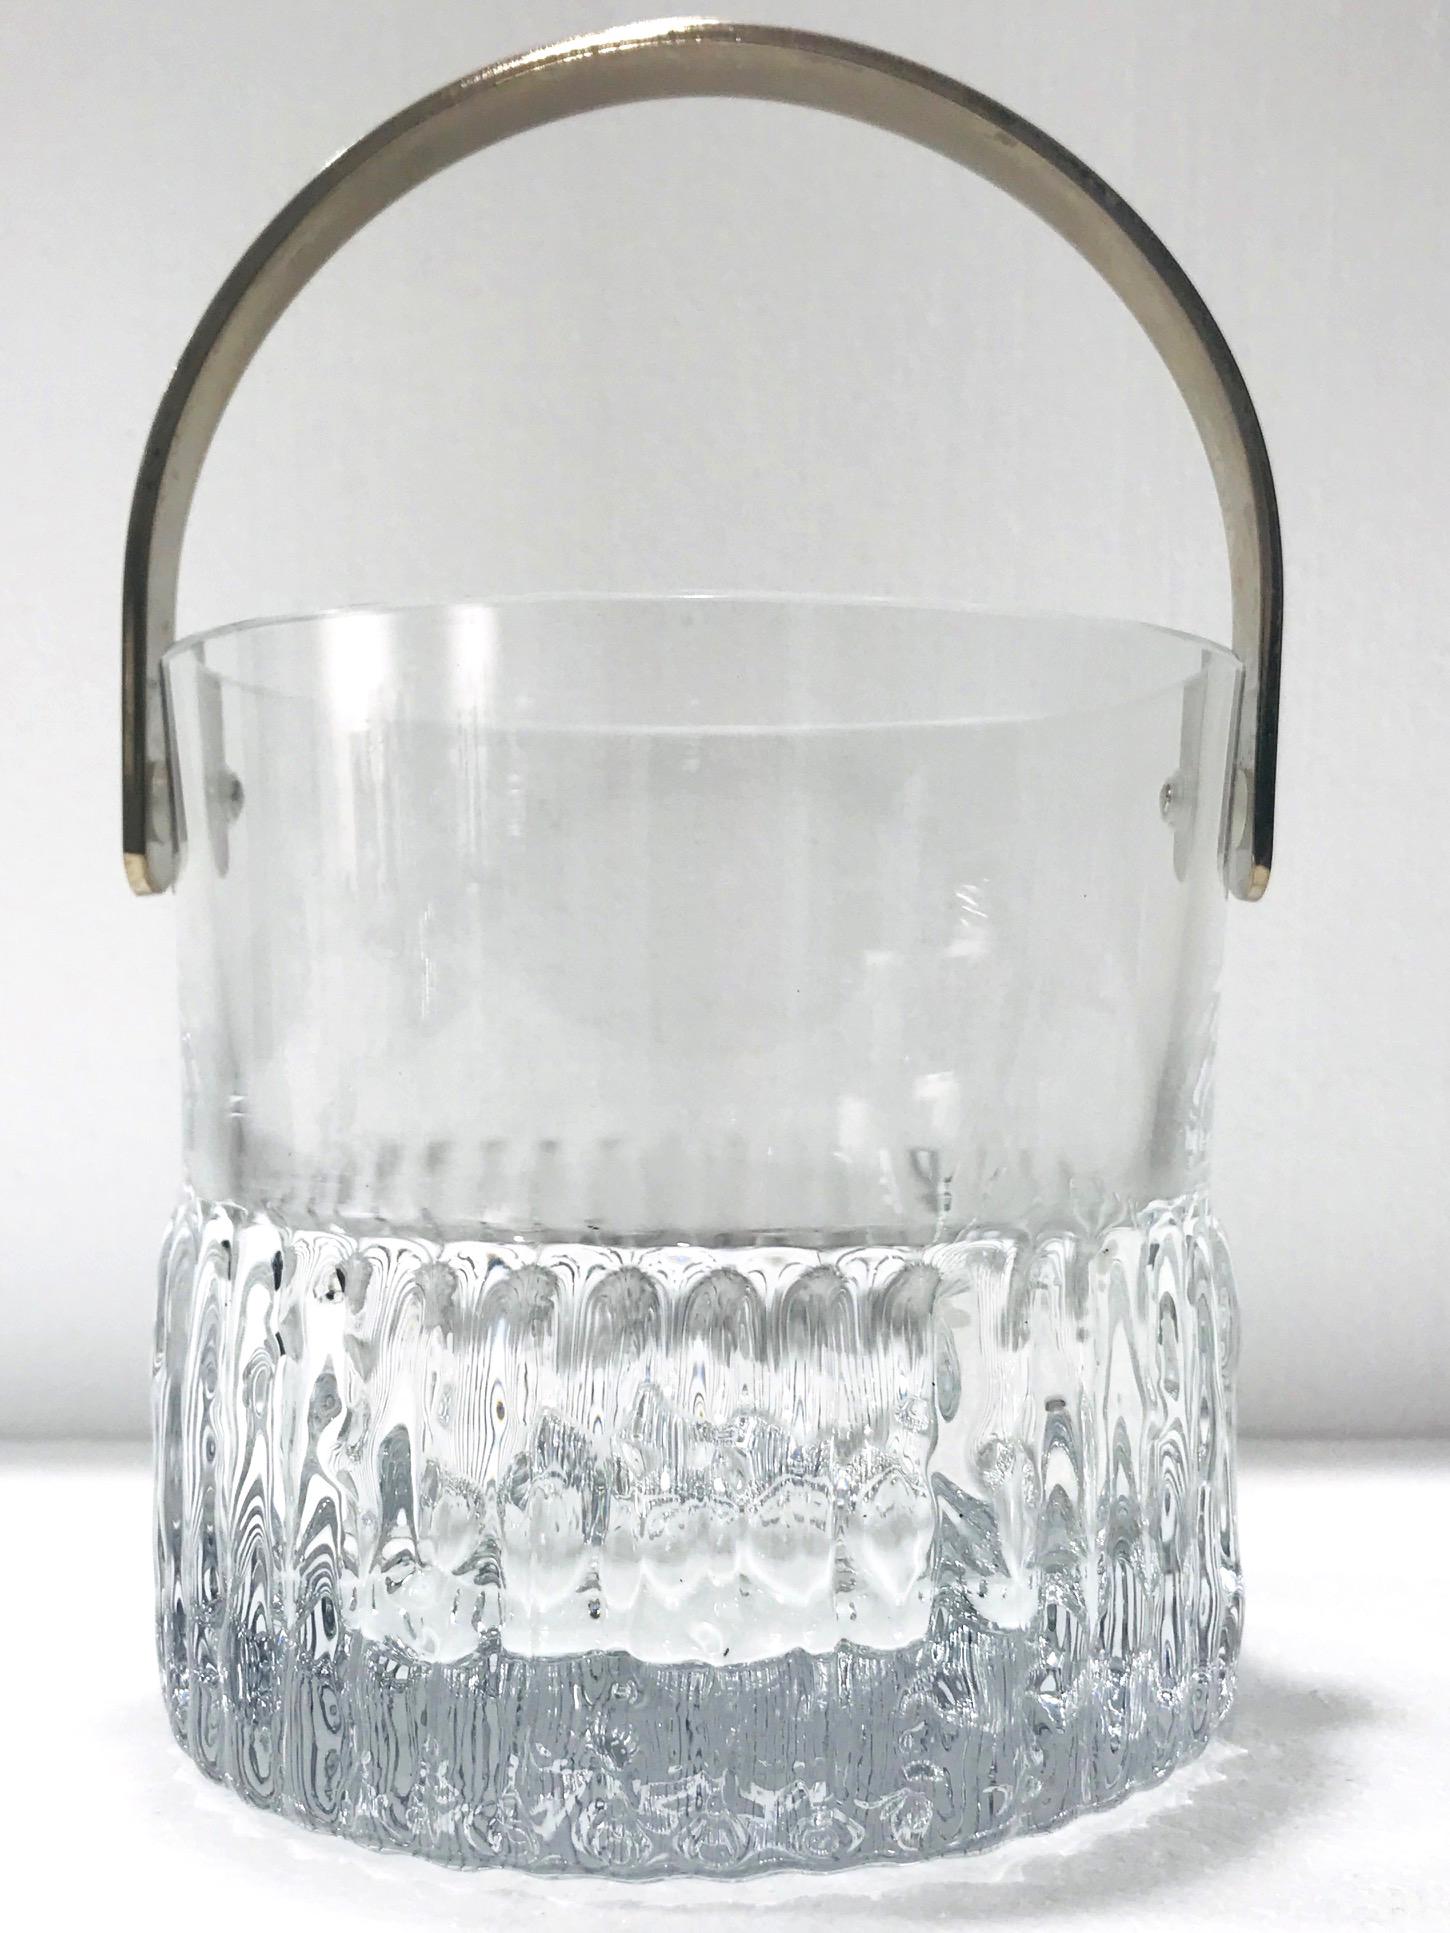 Mid-Century Modern crystal ice bucket with polished edges and stainless steel handle. Features heavyweight handcrafted crystal with fluted edges along resembling icicles or ice cubes, and with ripples on the bottom base. Makes a chic addition to any